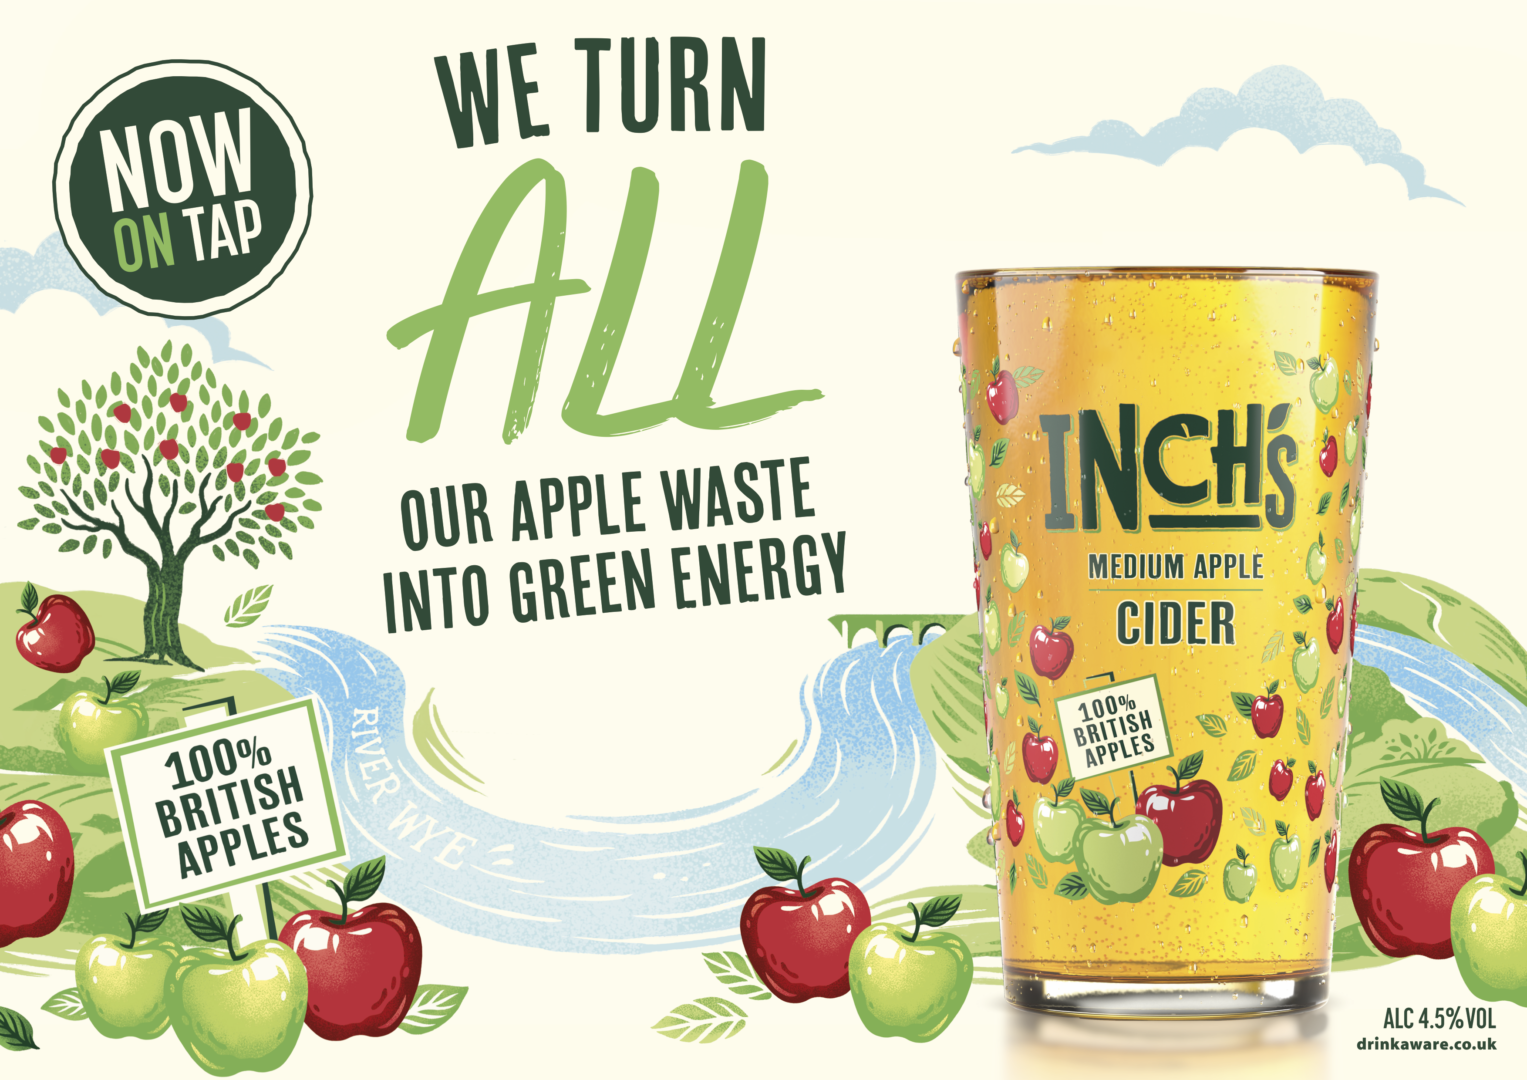 NEW SUSTAINABLE CIDER BRAND, INCH’S, SET TO SHAKE UP THE MAINSTREAM APPLE CIDER CATEGORY